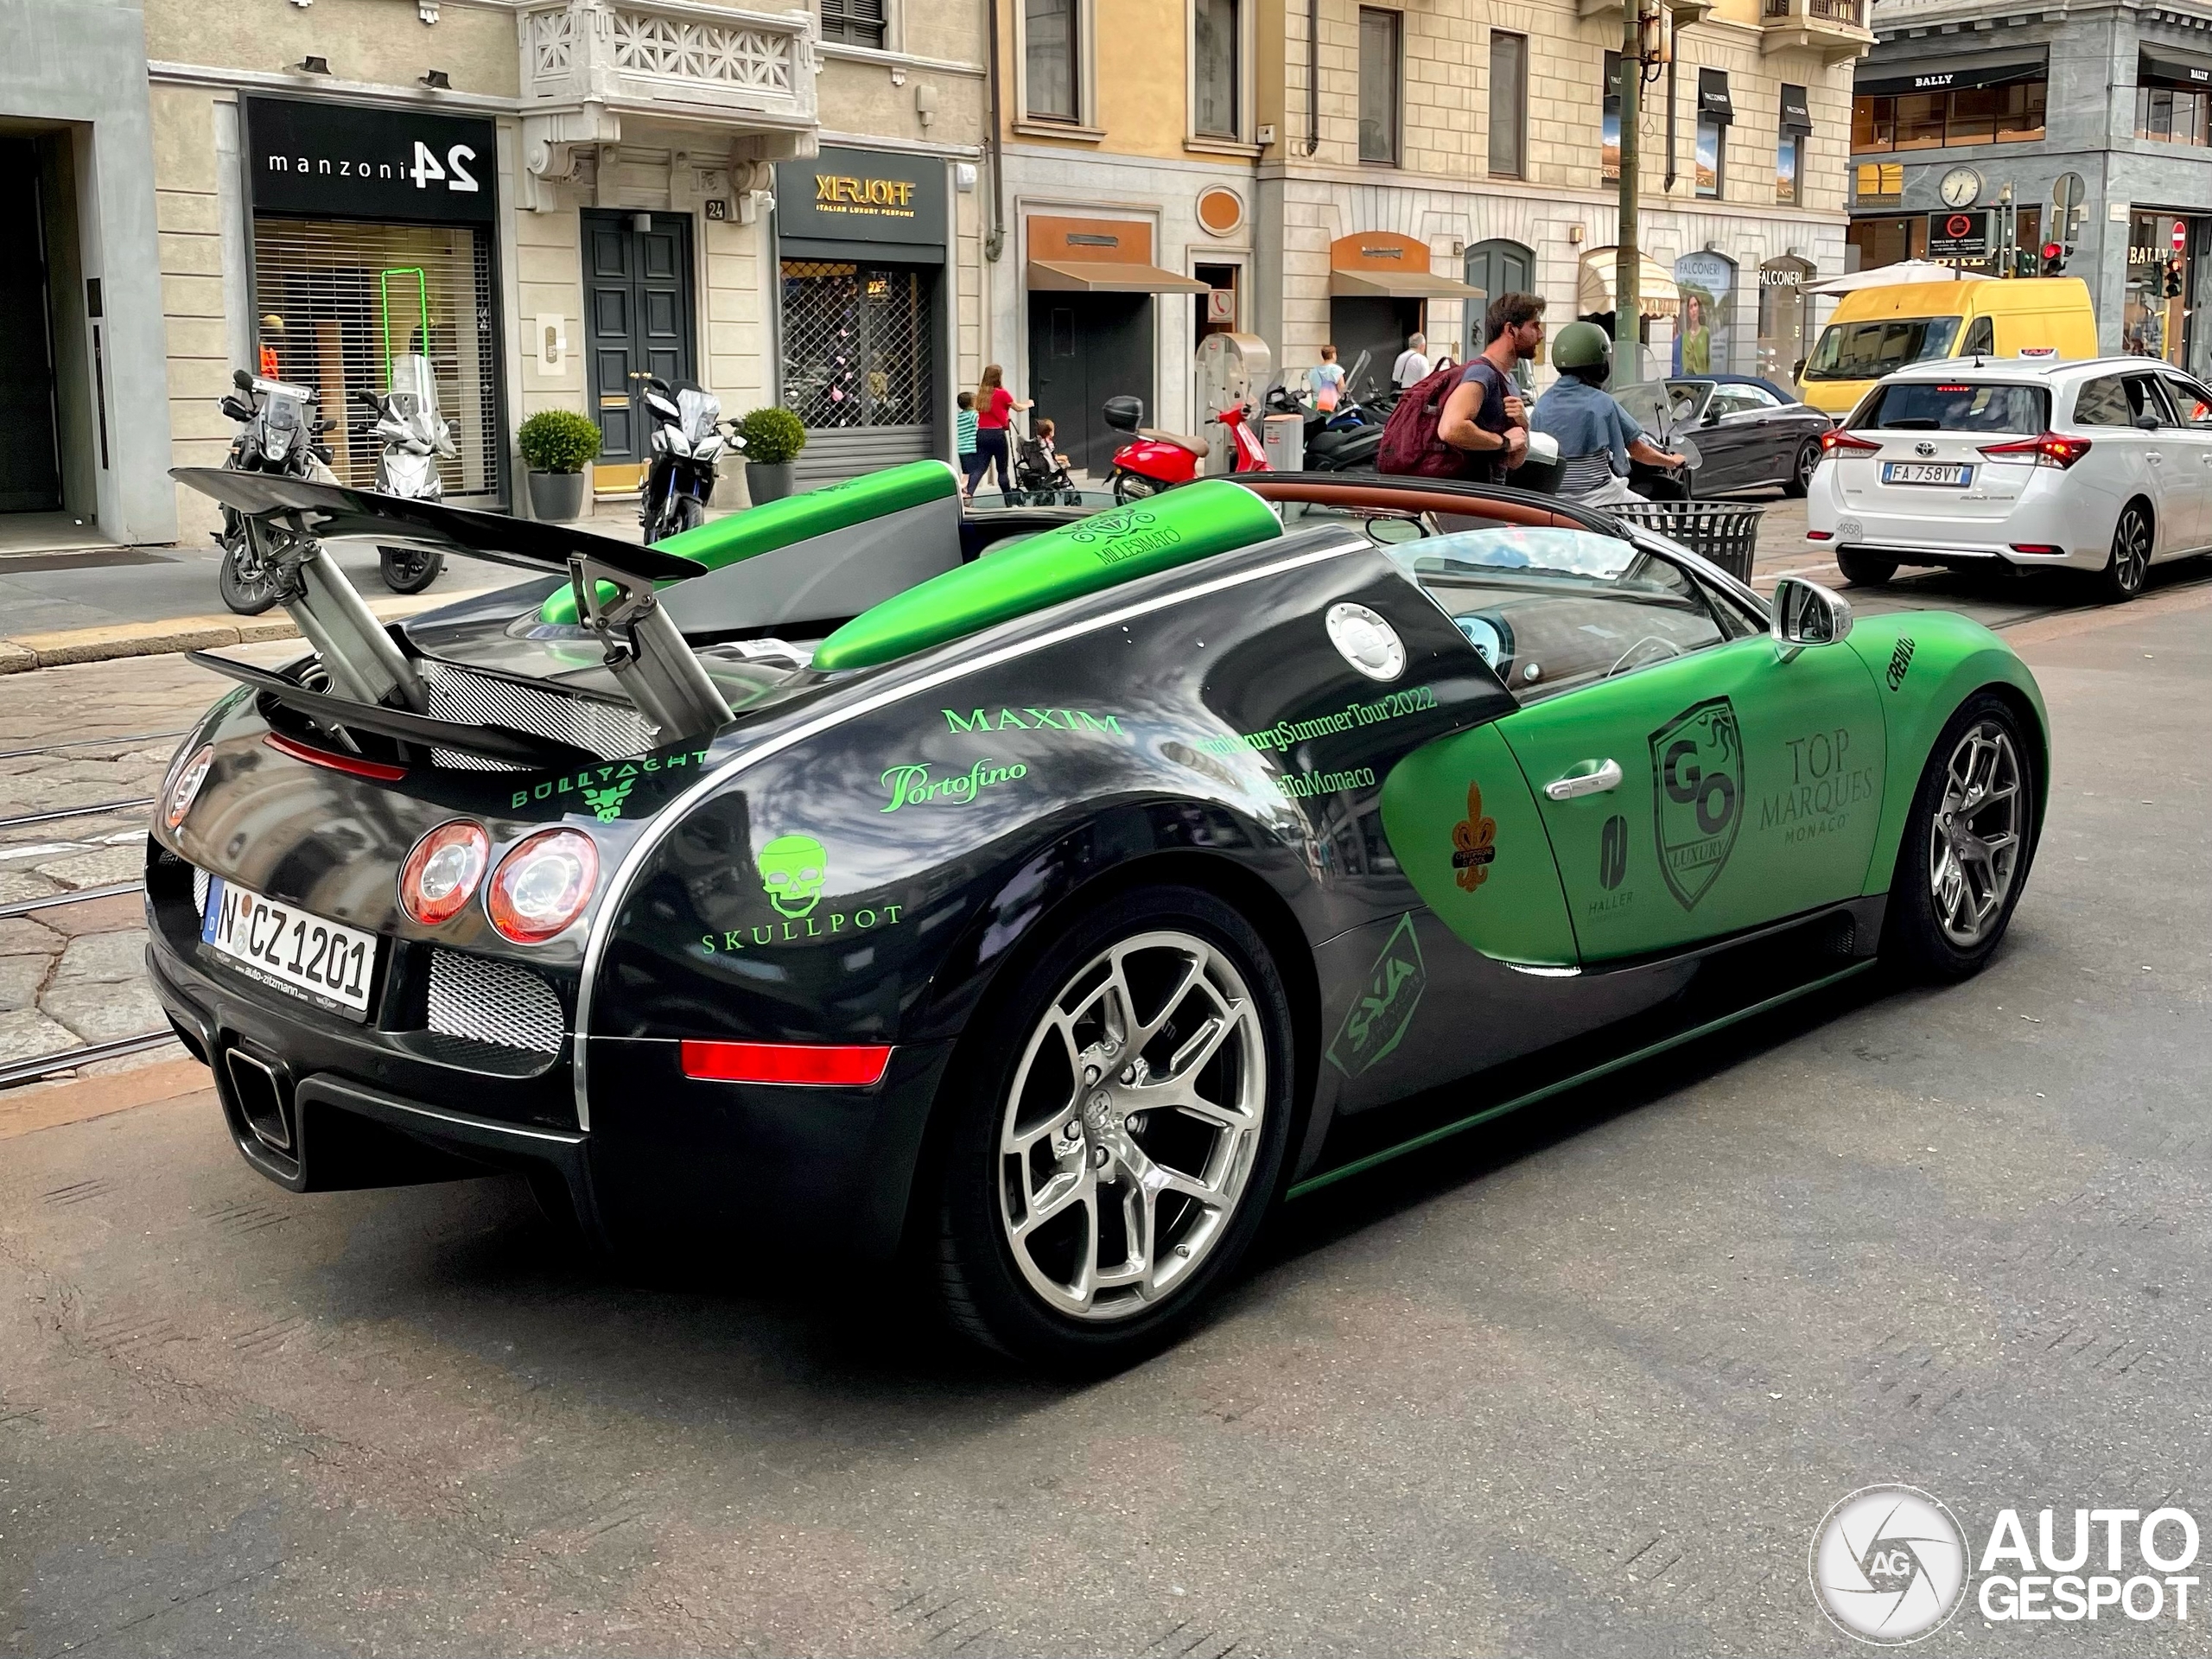 Is tis the ugliest Veyron